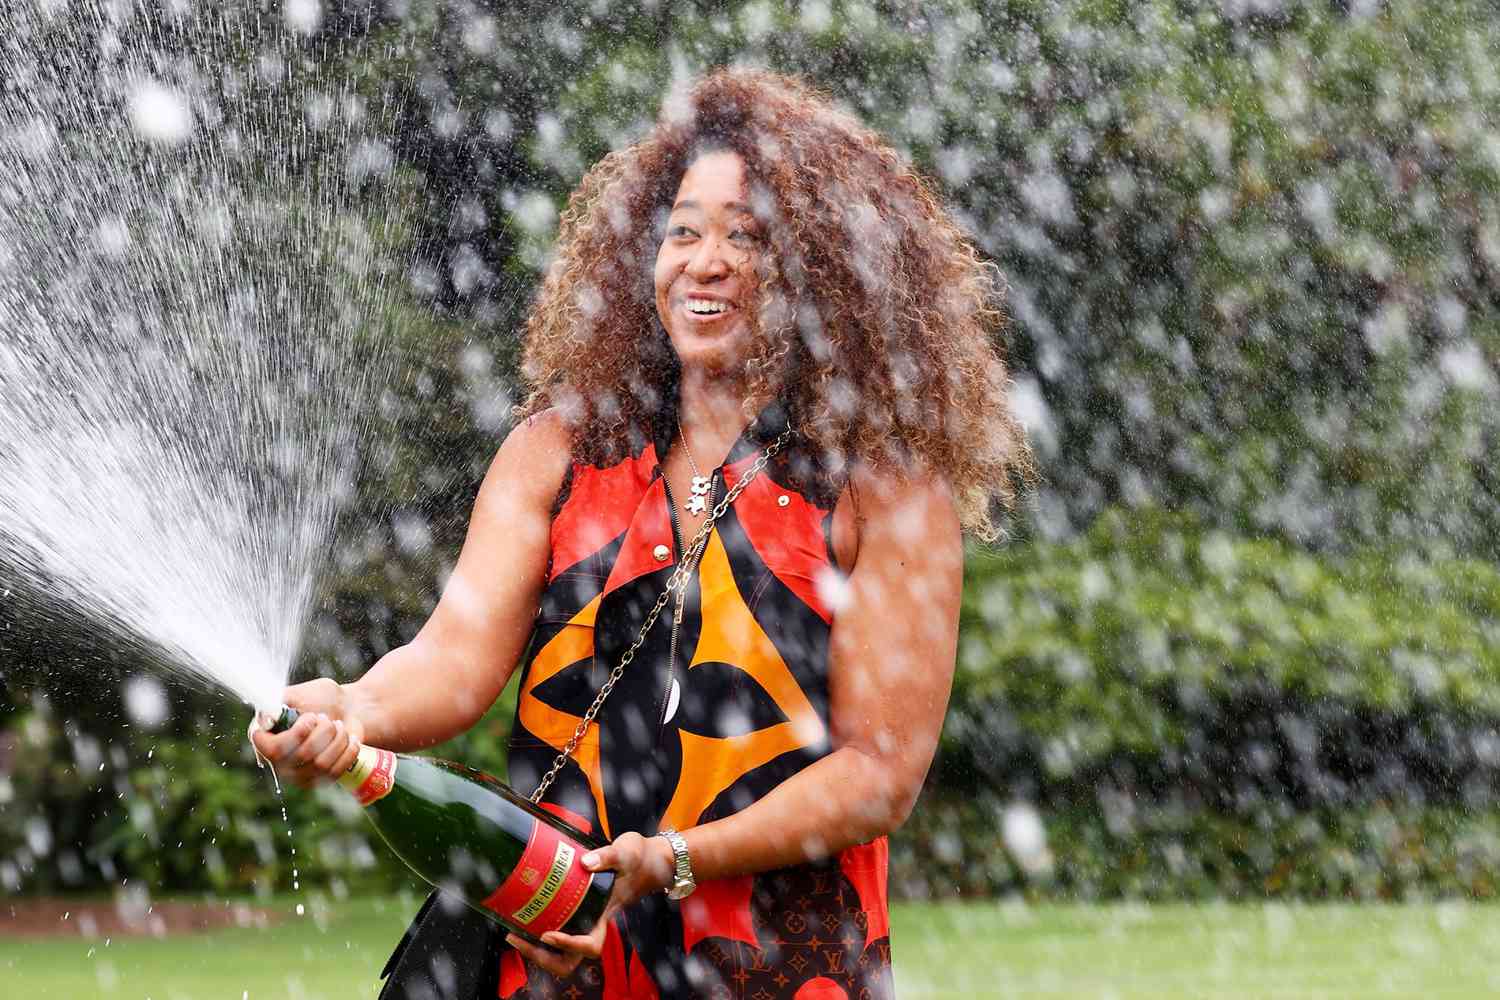 Naomi Osaka of Japan sprays champagne during a photo shoot of the 2021 Australian Open winner's trophy at the Government House in Melbourne on February 21, 2021